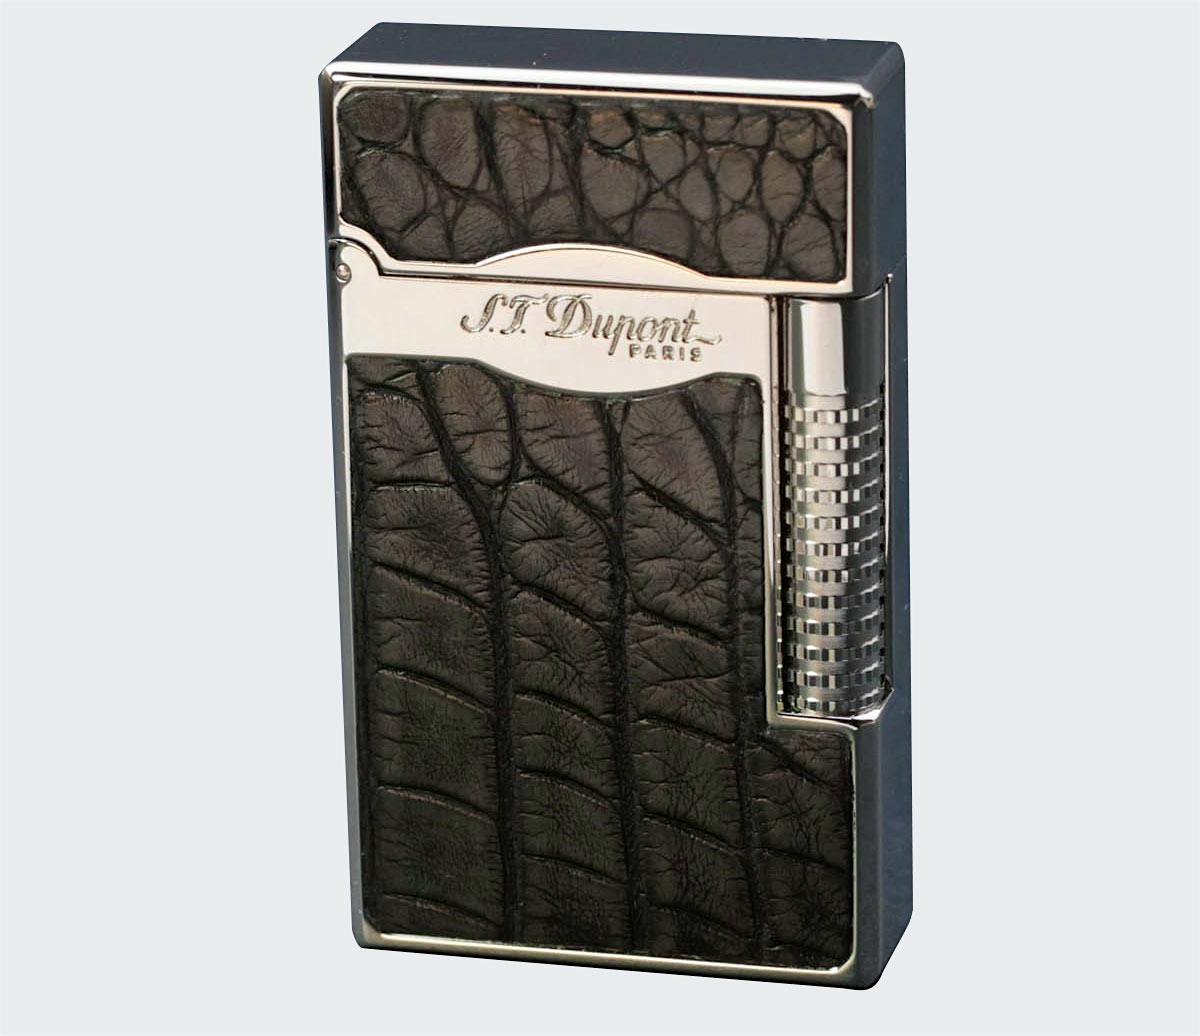 Brizard's take on the Le Grand S.T. Dupont lighter, pictured here in charcoal grey crocodile leather.